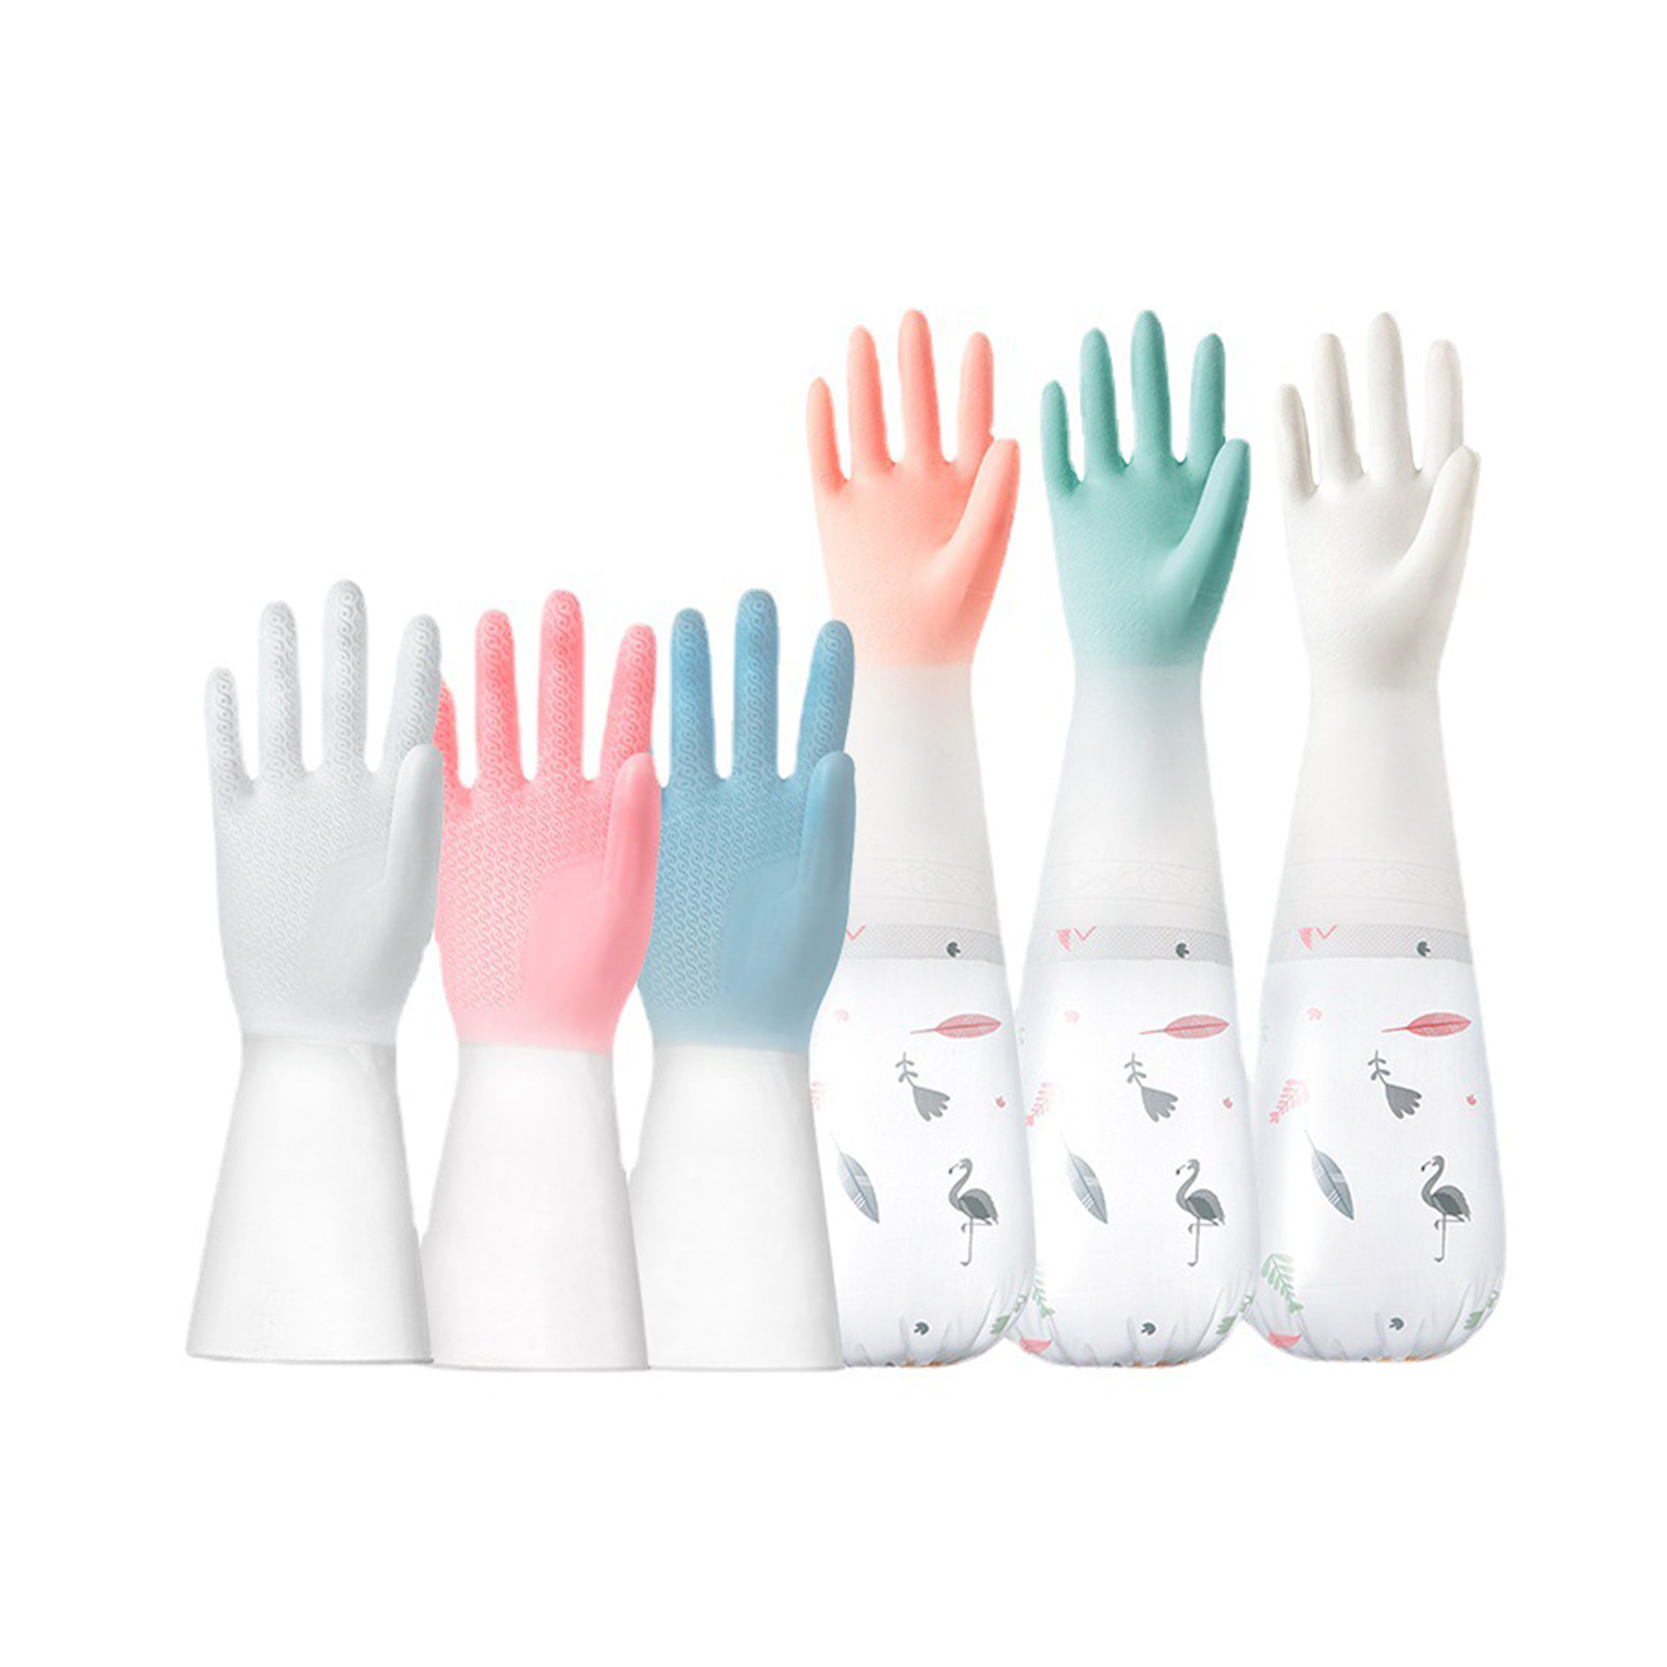 Kitchen Dishwashing Household Rubber Gloves Extra Long Thick Wear-Resistant Dirty Cleaning Special PVC Rubber Gloves Labor Protection Durable